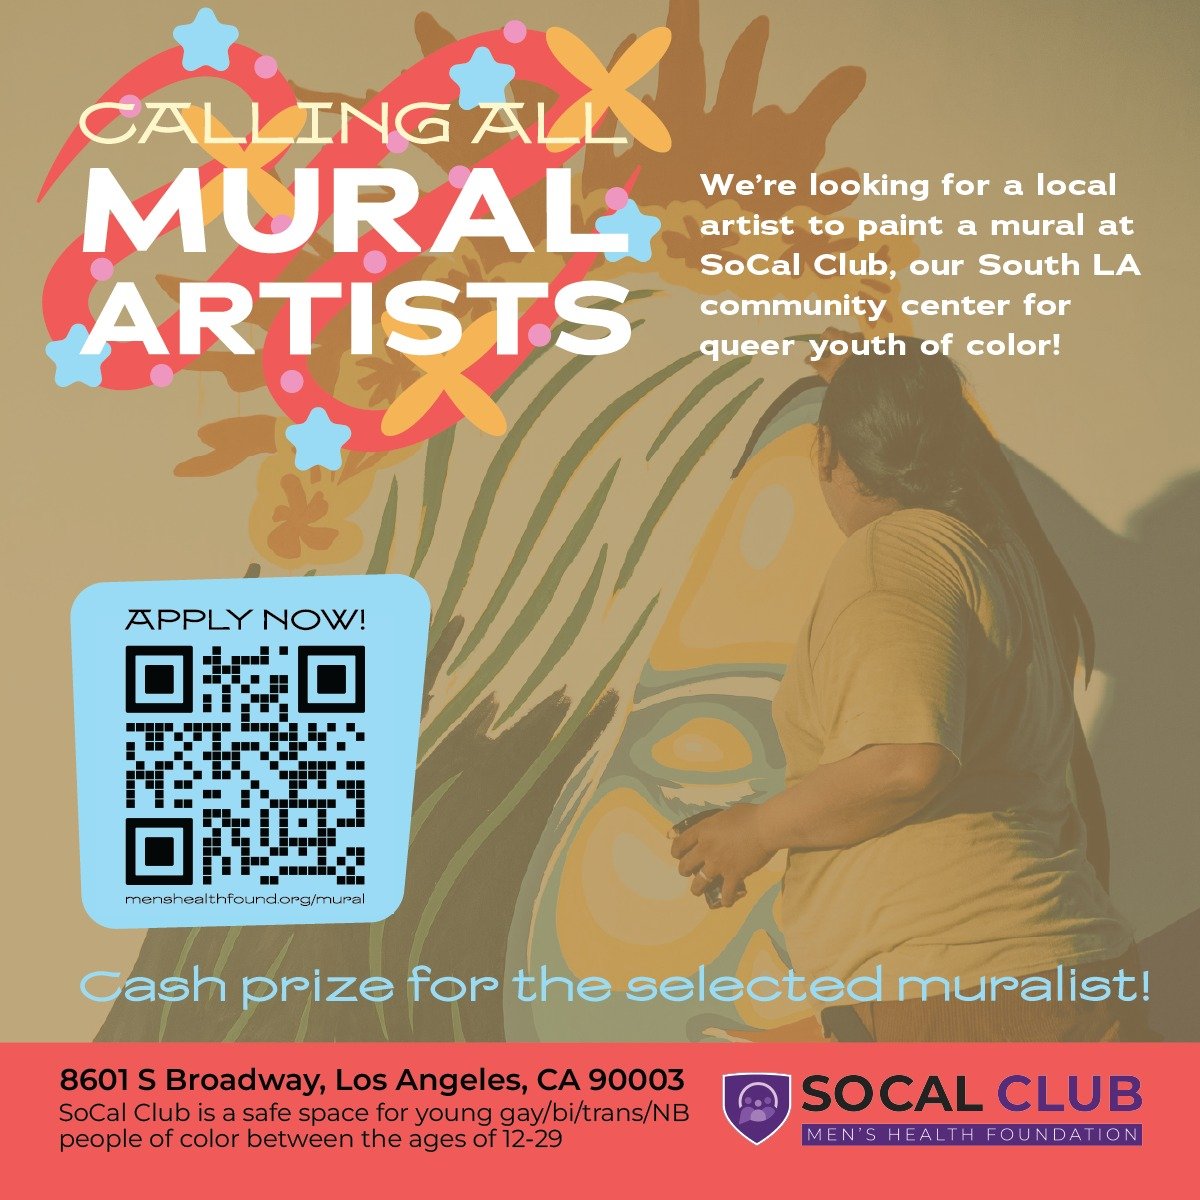 Calling all mural artists! 🎨 We're looking to spruce up our look, and we need your help! Apply to paint our queer youth center get paid to represent and celebrate our community! 🤩

Apply at menshealthfound.org/mural 🌈

#mural #muralartist #muralar